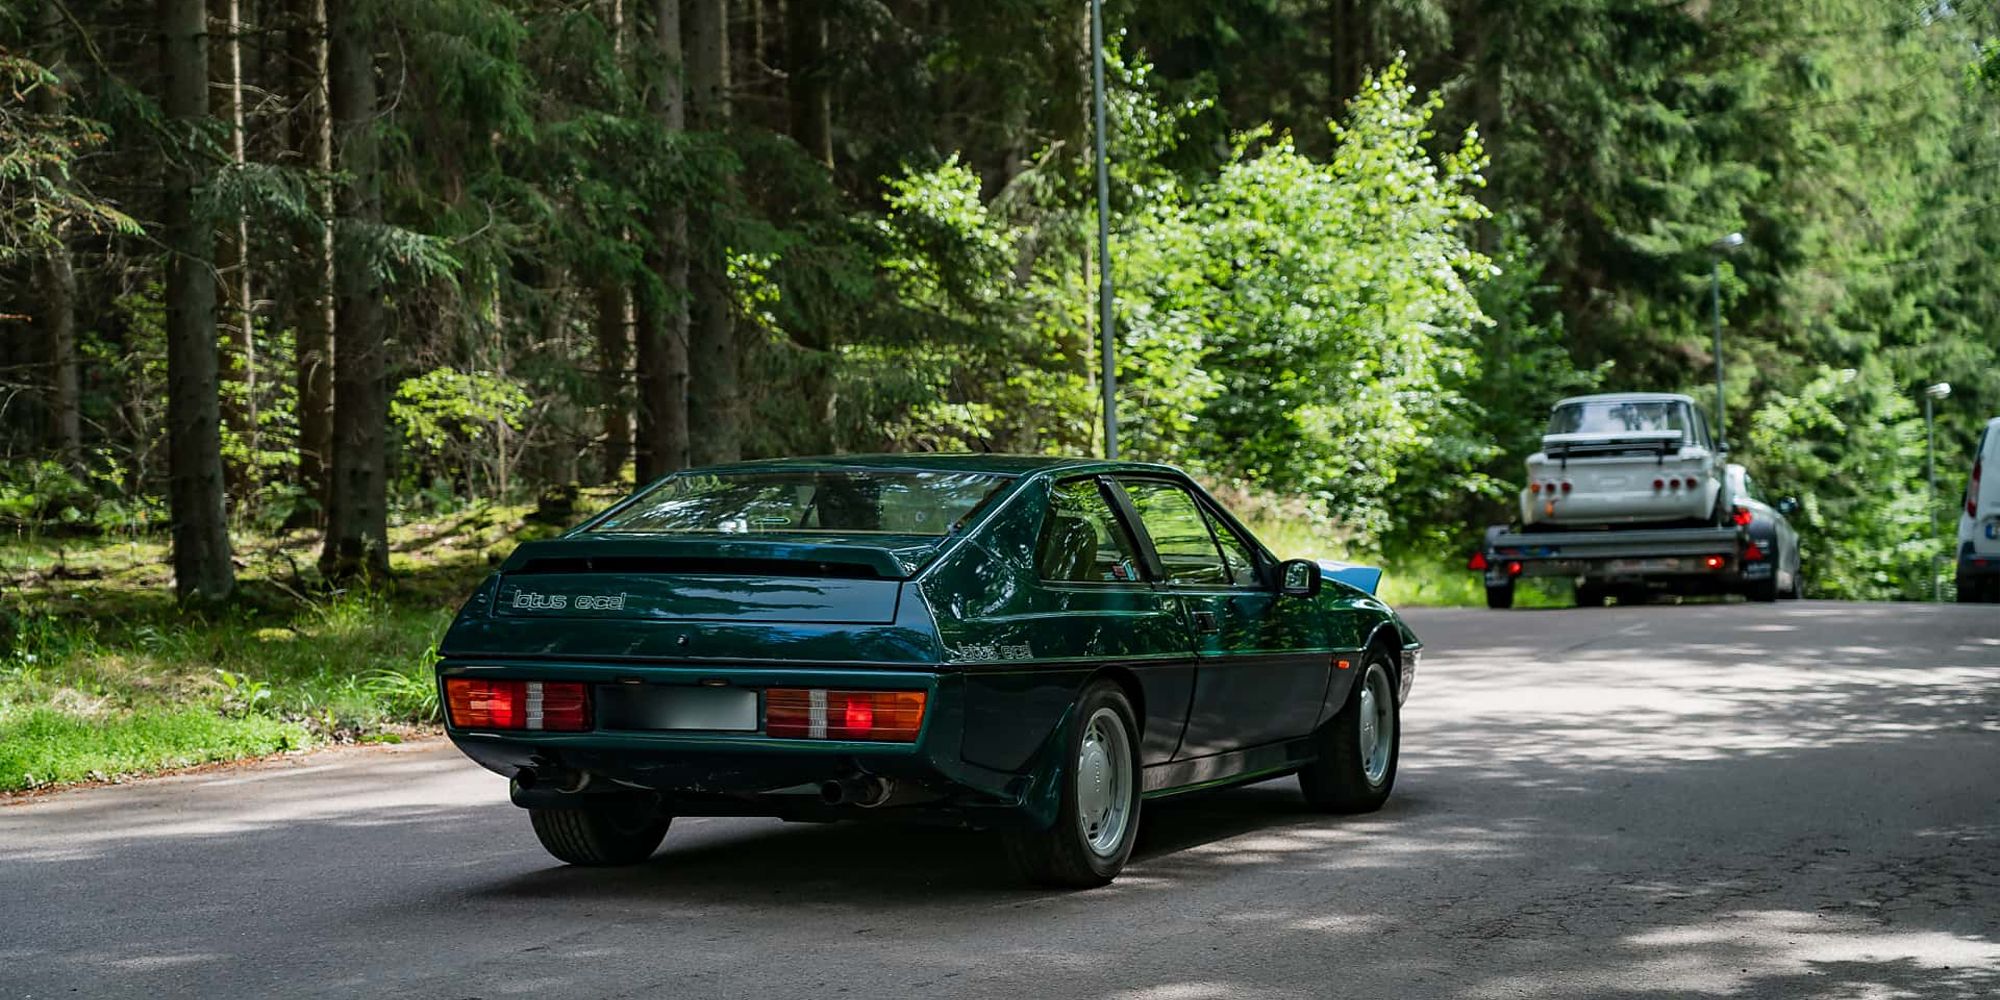 The rear of a green Lotus Excel